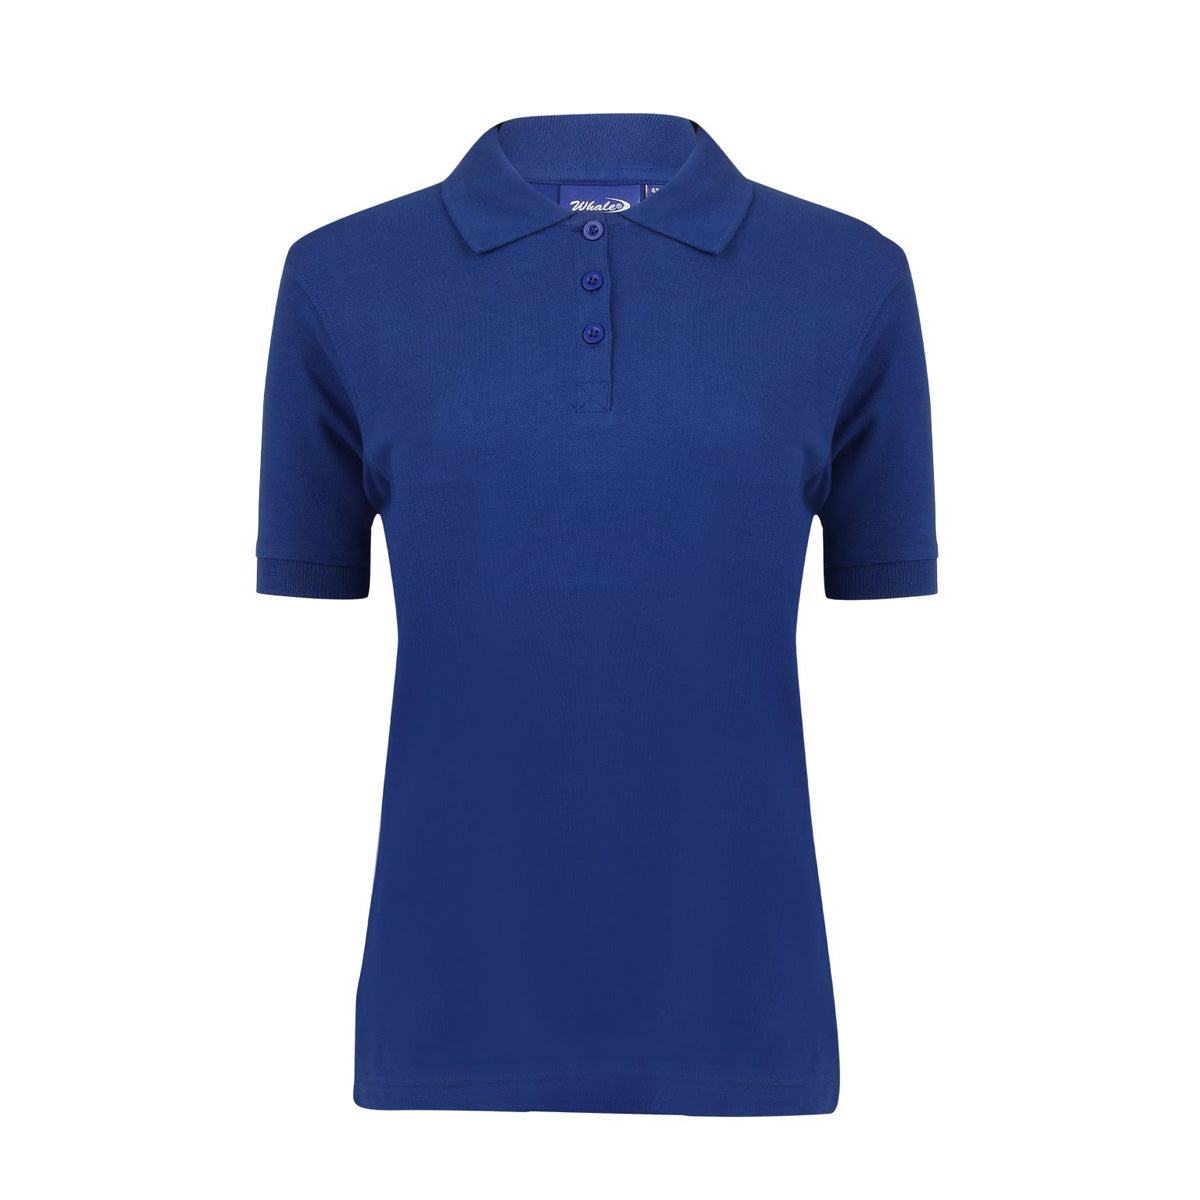 polo, polo shirt, polo store, ralphlauren, polo t shirts, golf polo, golf shirts, golf t shirt, polo shirt ladies, work outfit, outfits, nevy polo